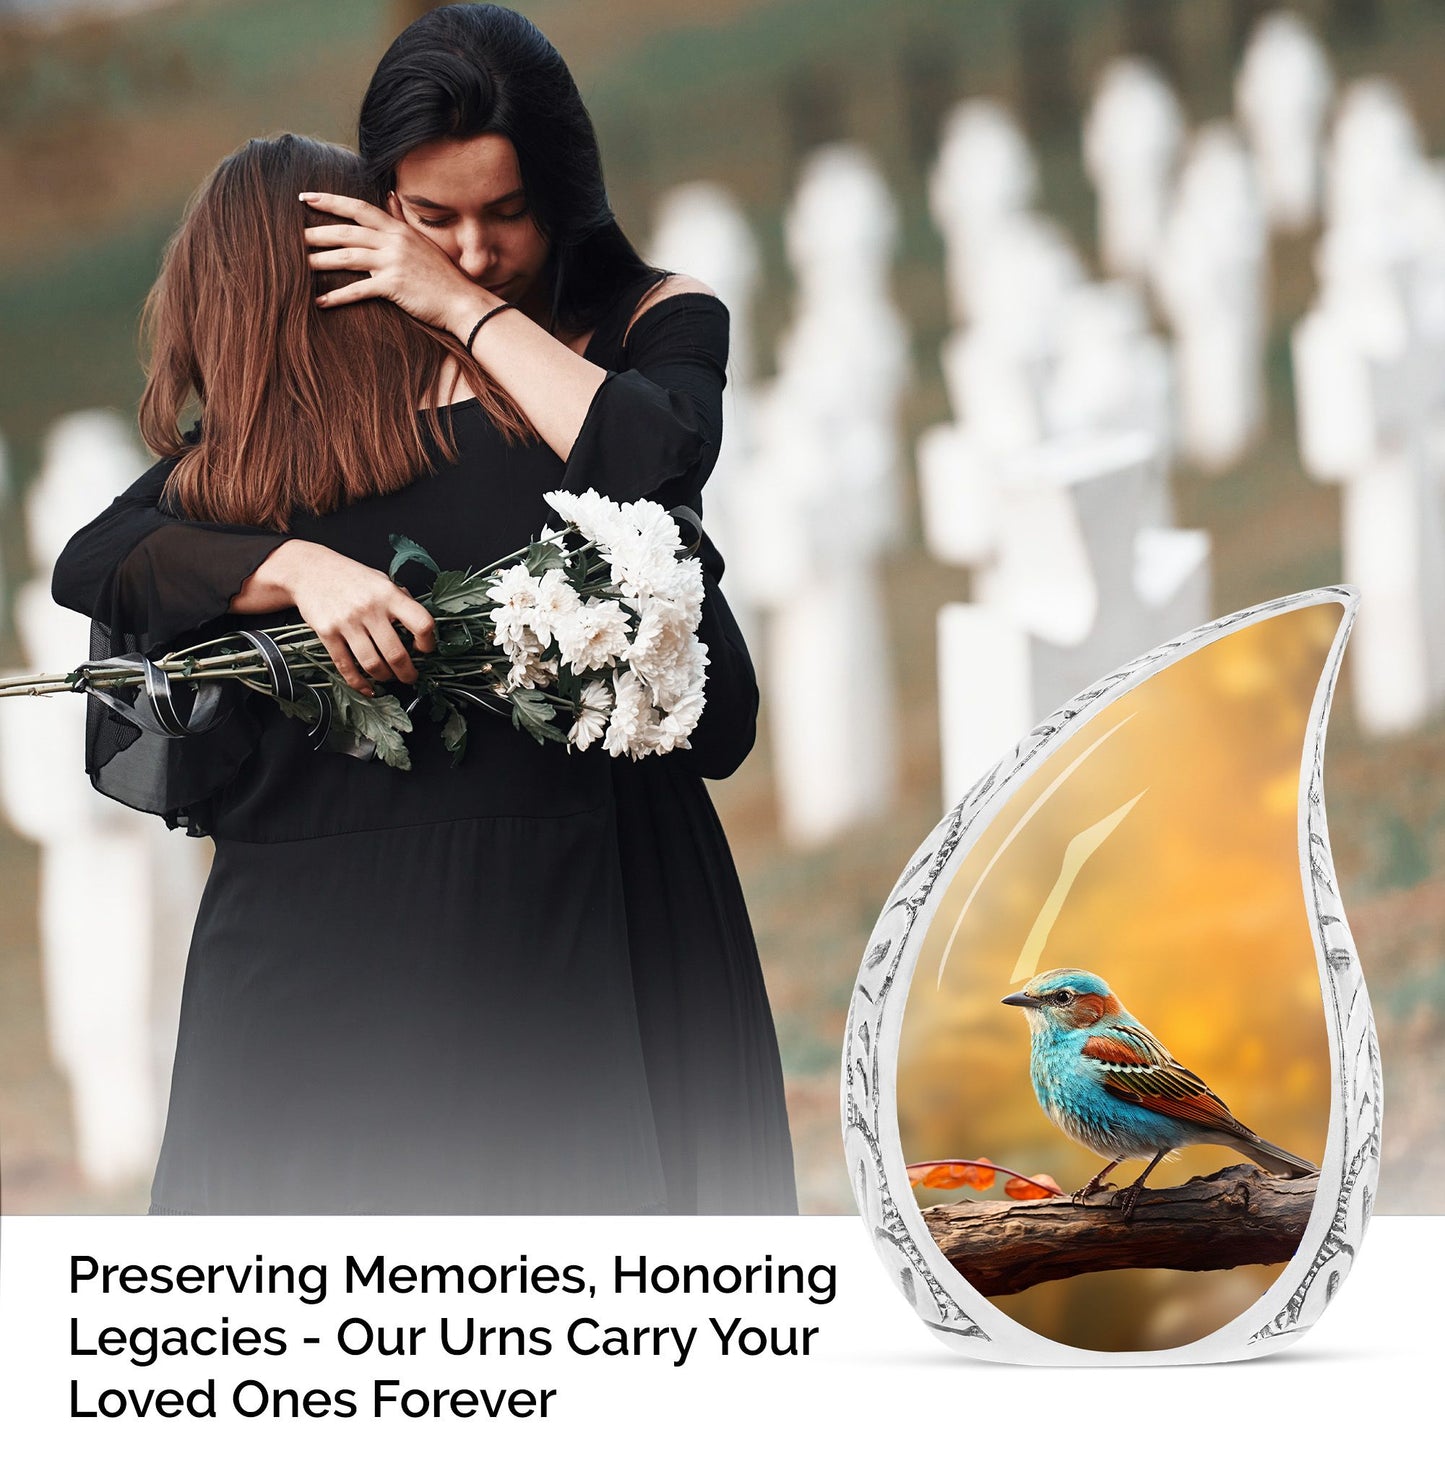 Large, colorful Sparrow themed urn for adults, a unique metal cremation urn designed for women to securely hold human ashes.